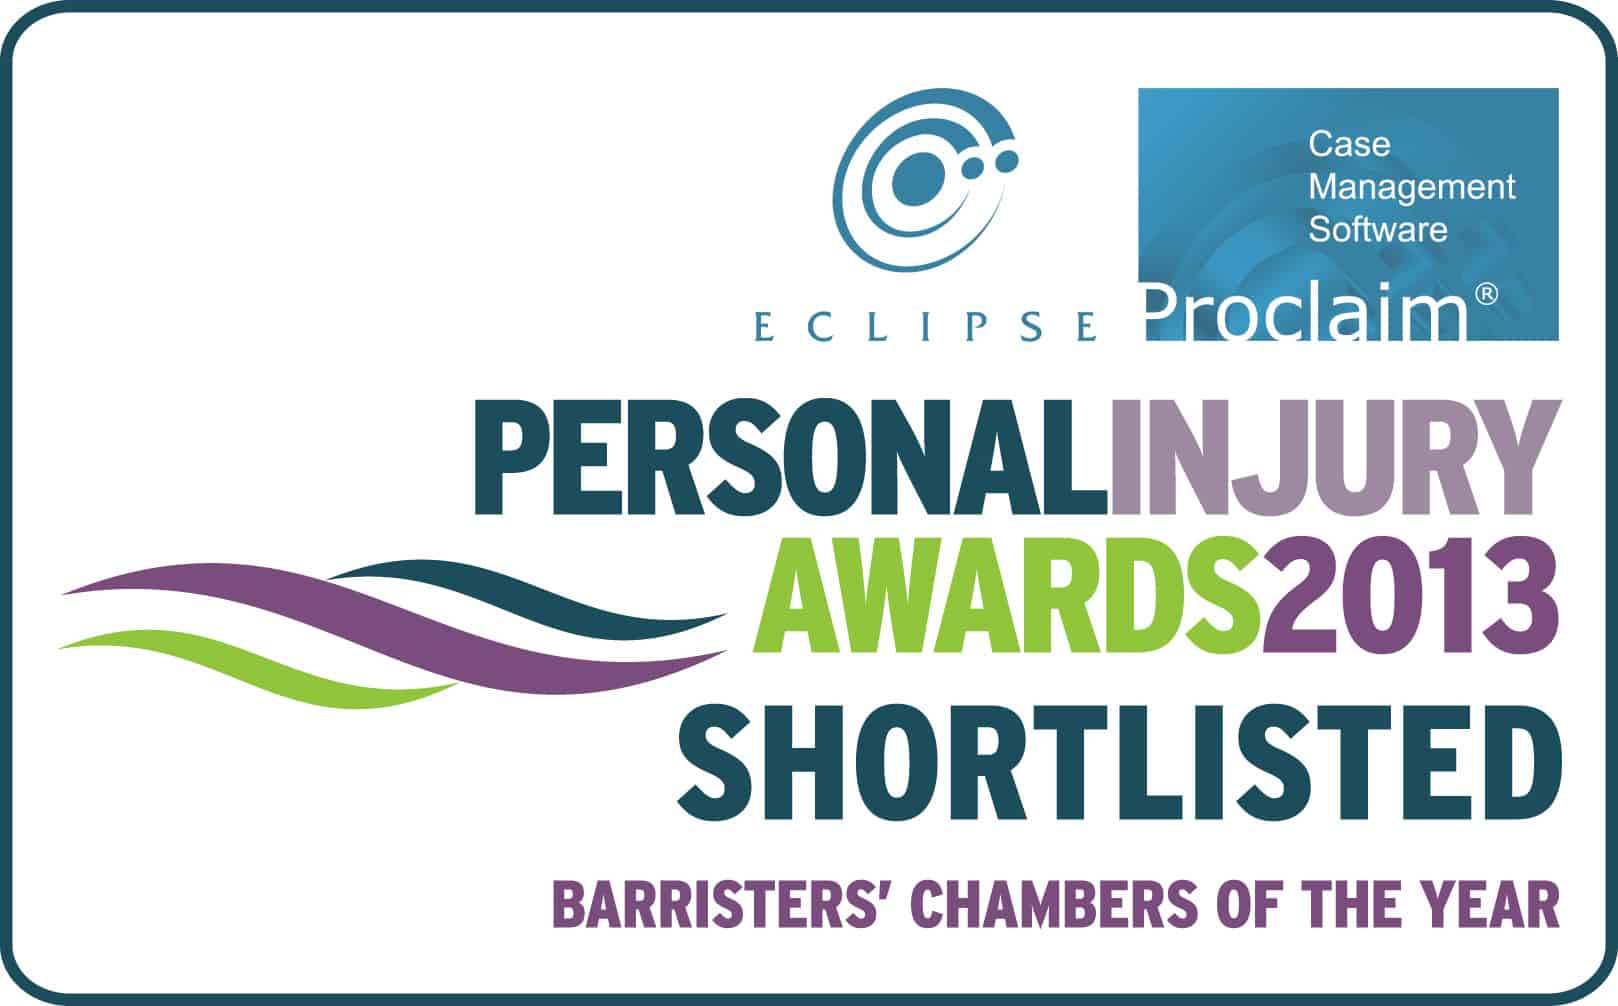 Chambers is Shortlisted for Chambers of the Year